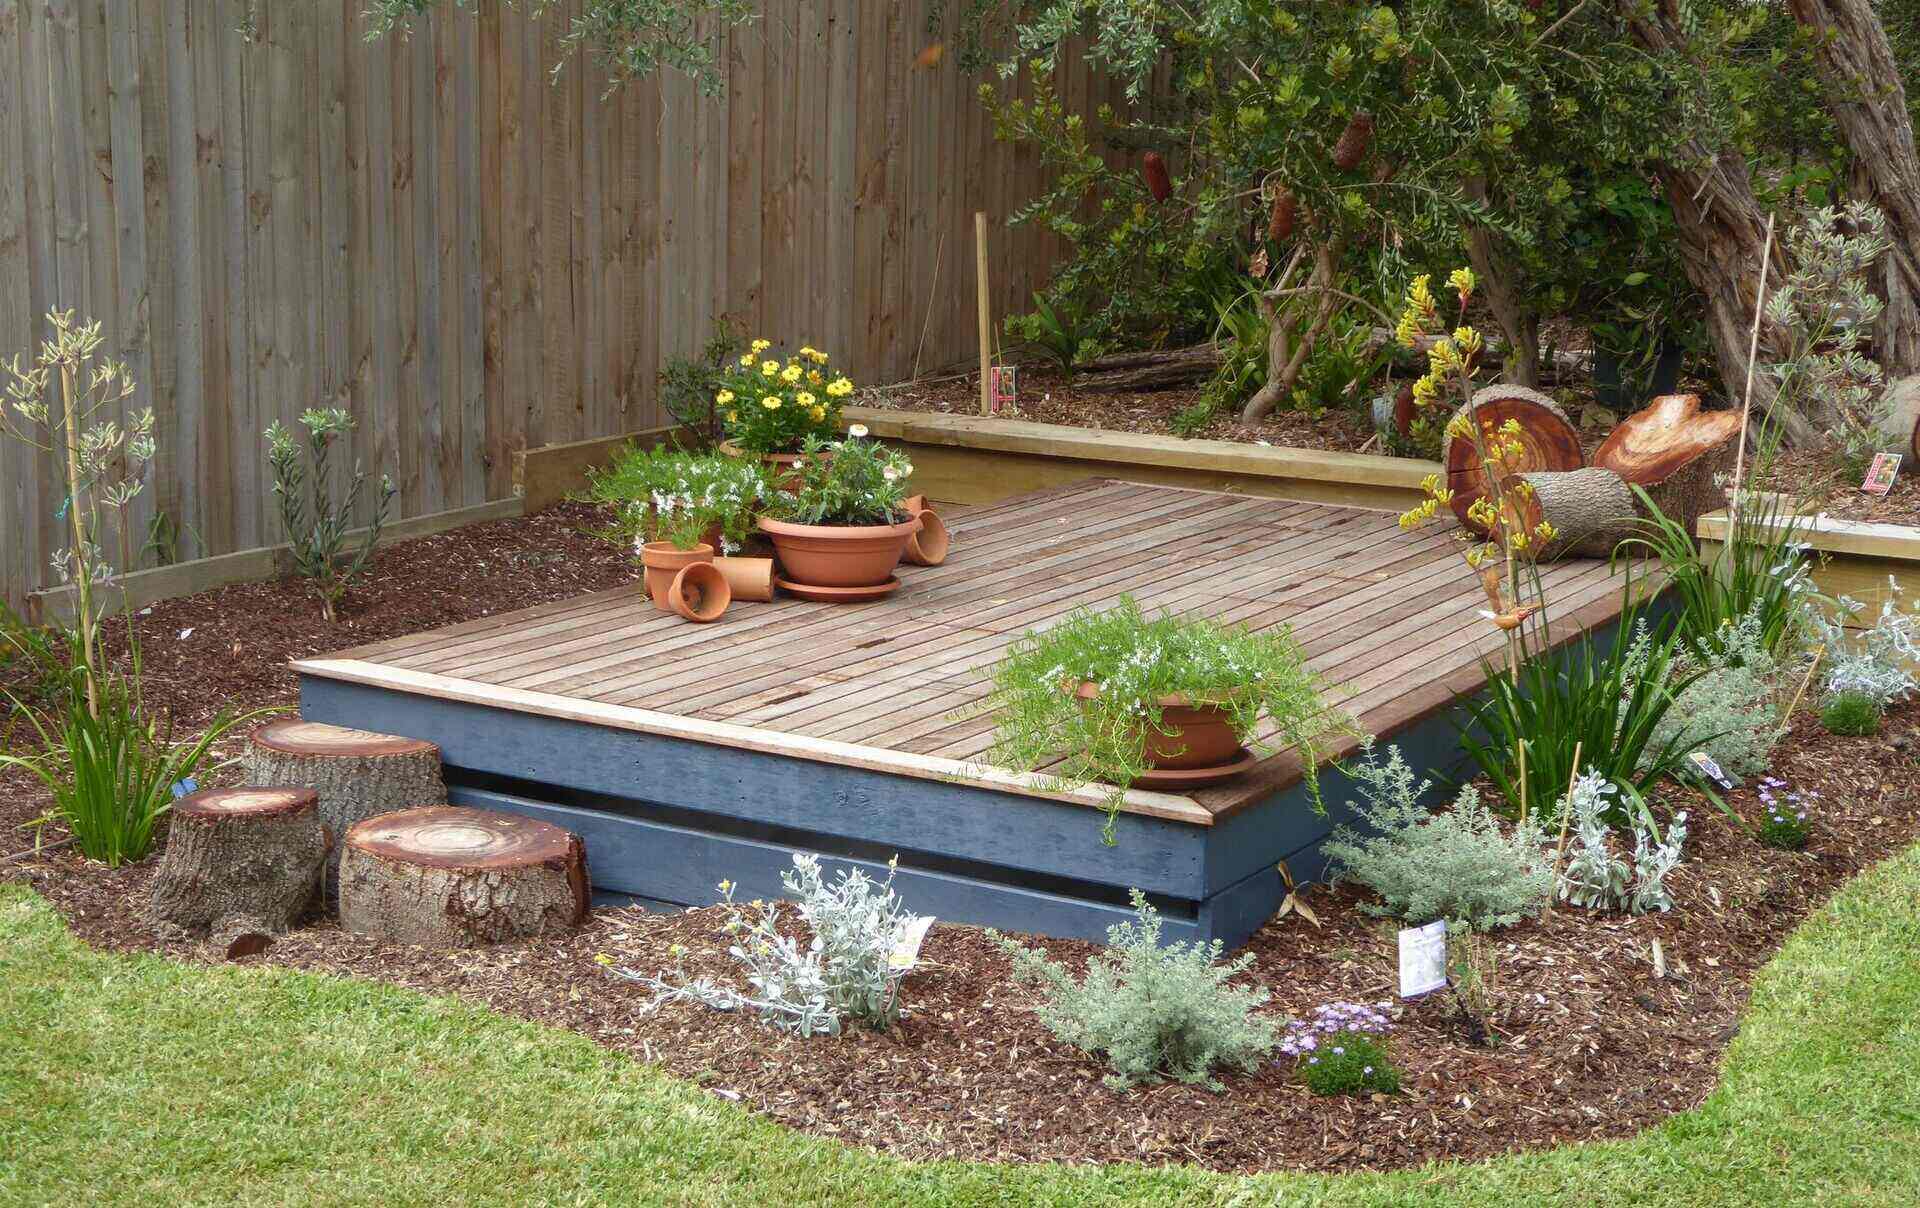 Septic Wooden Box: What Low Maintenance Ground Cover To Plant